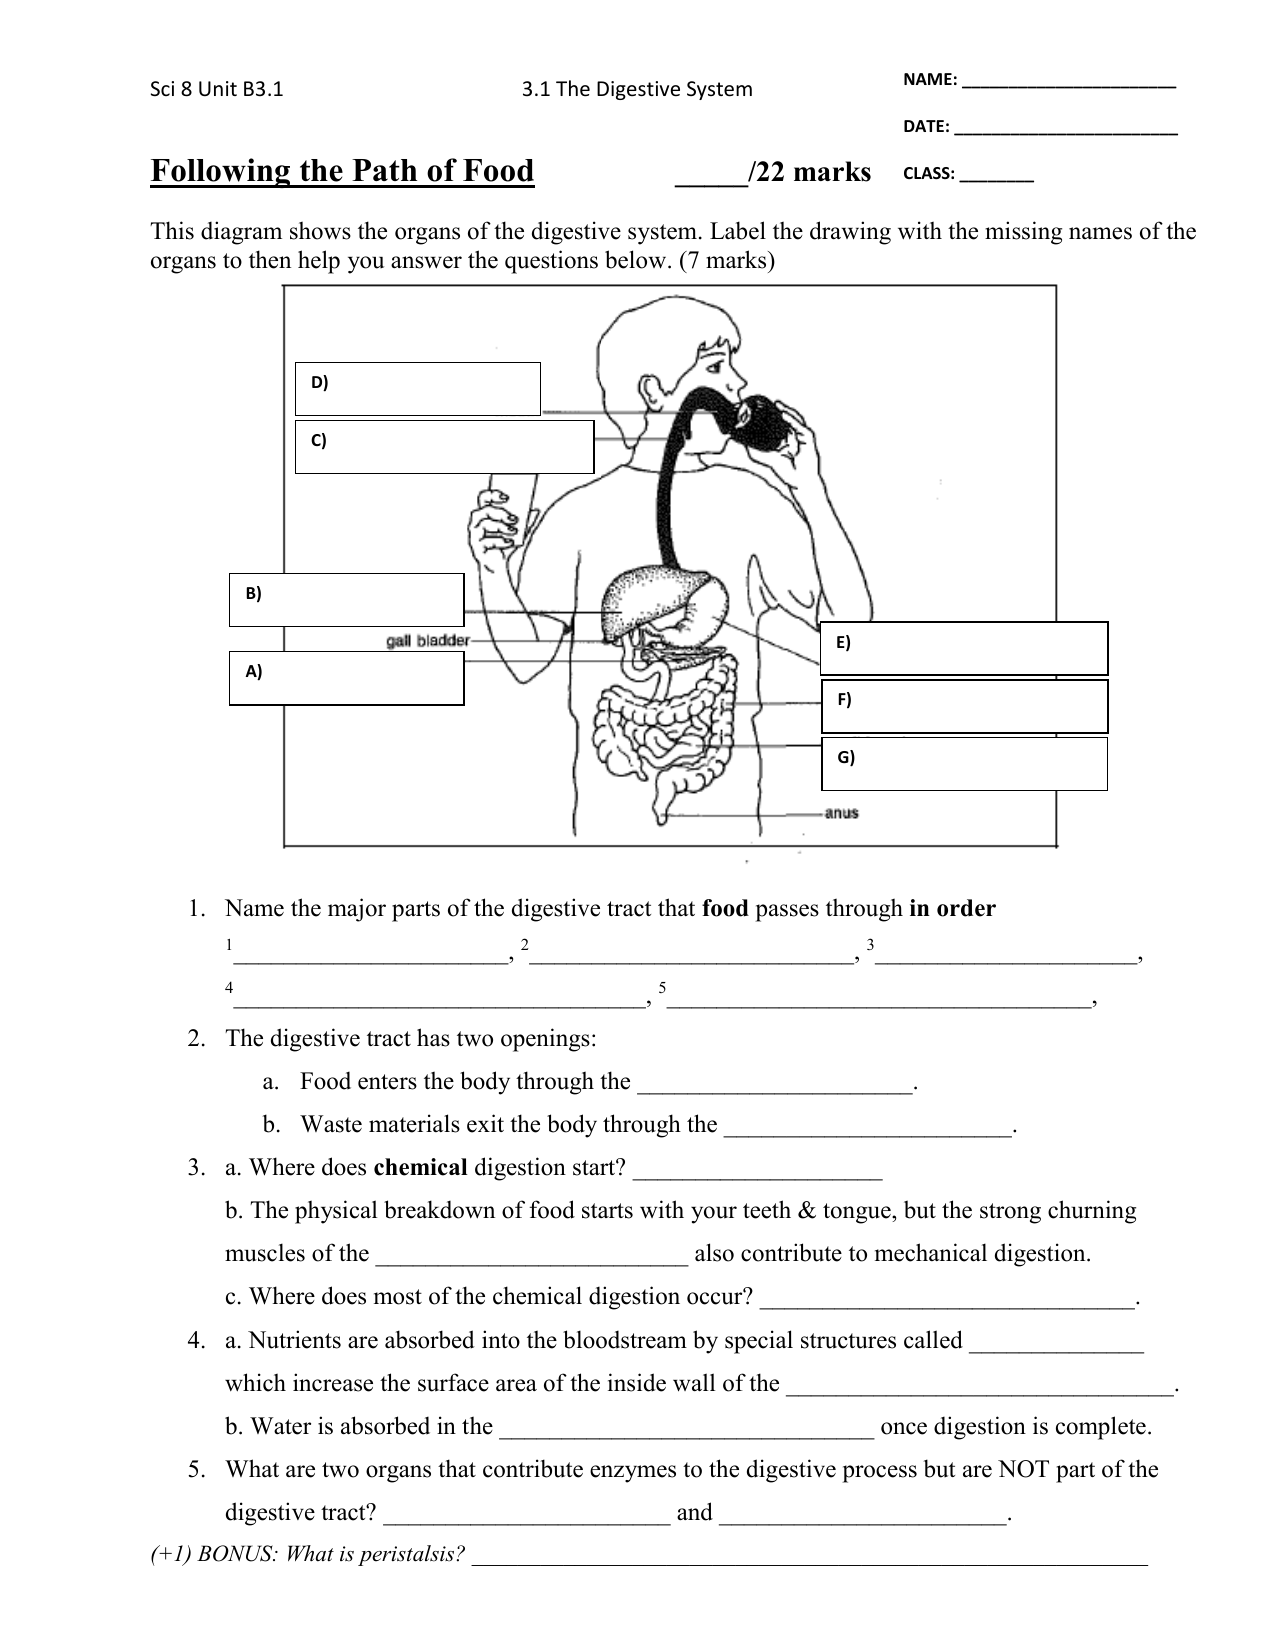 case study questions on digestive system